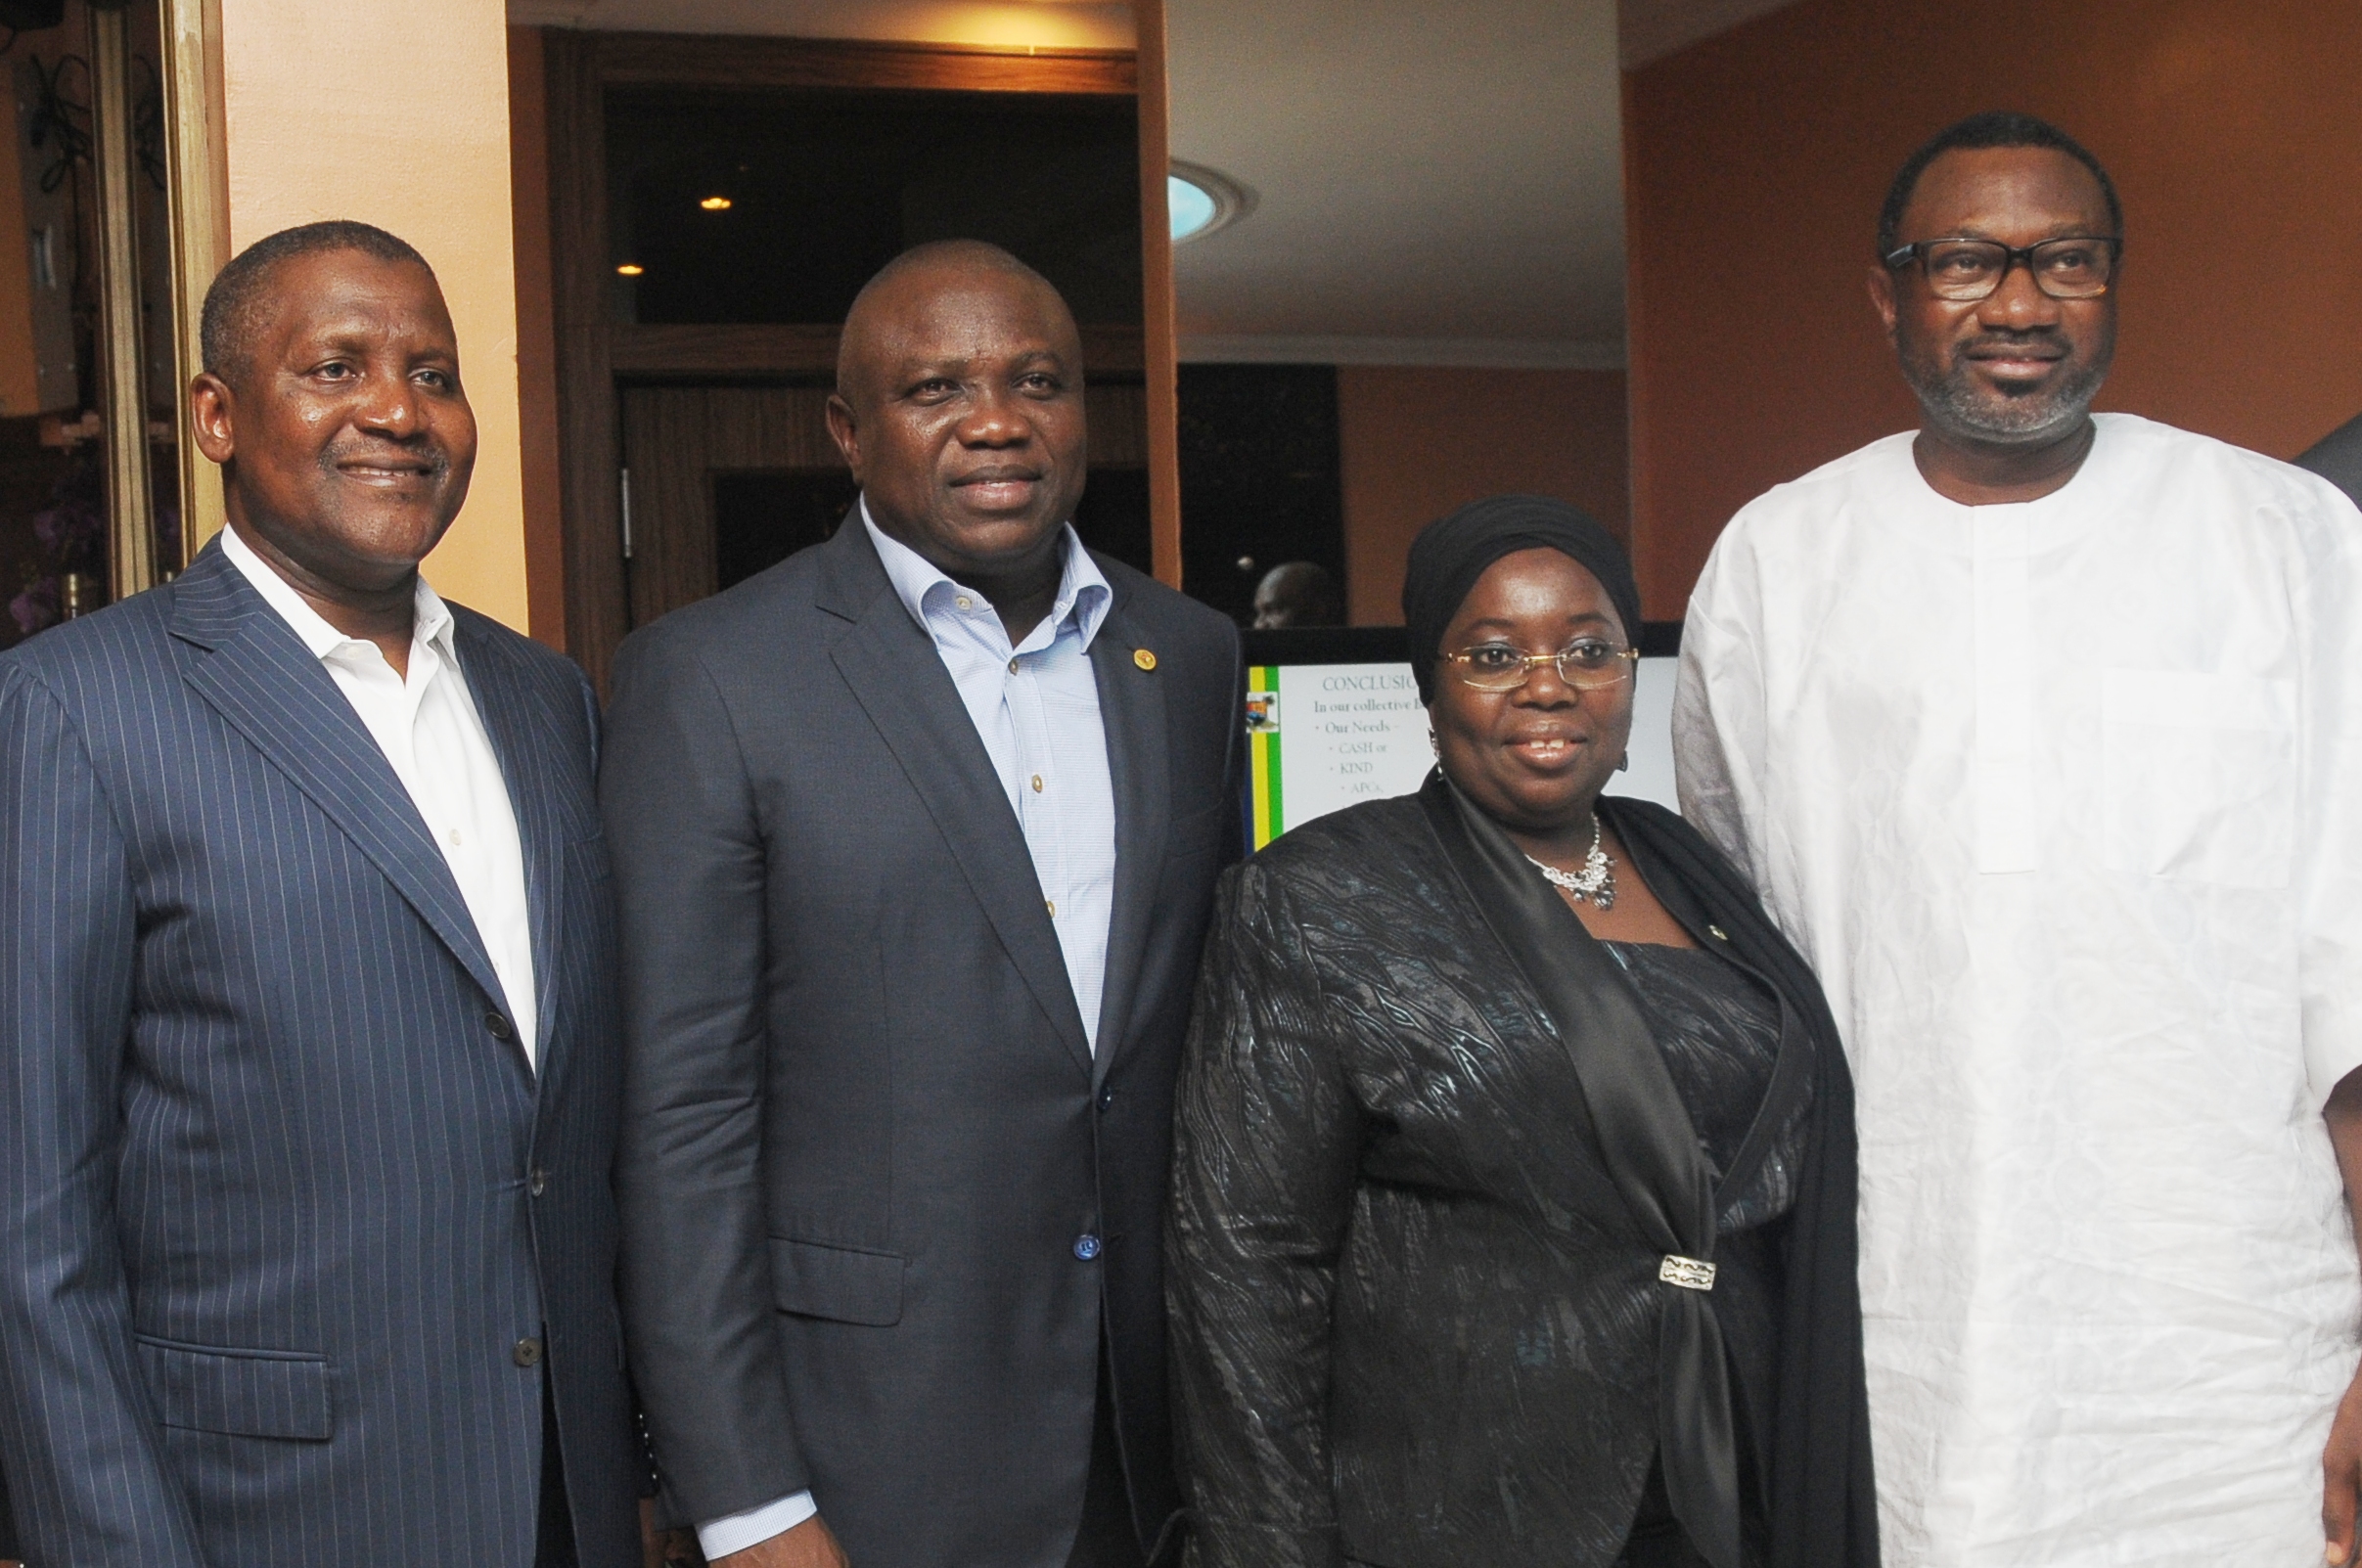 Lagos State Governor, Mr. Akinwunmi Ambode (2nd left), his Deputy, Dr. (Mrs.) Oluranti Adebule (2nd right), President/C.E.O, Dangote Group of Companies, Alhaji Aliko Dangote (left) and Chairman, Forte Oil, Mr. Femi Otedola (right) during a ‘Dinner with His Excellency’ organized by the Lagos State Security Trust Fund (LSSTF) at Ademola Adetokunbo Street, Victoria Island, on Thursday, August 06, 2015.